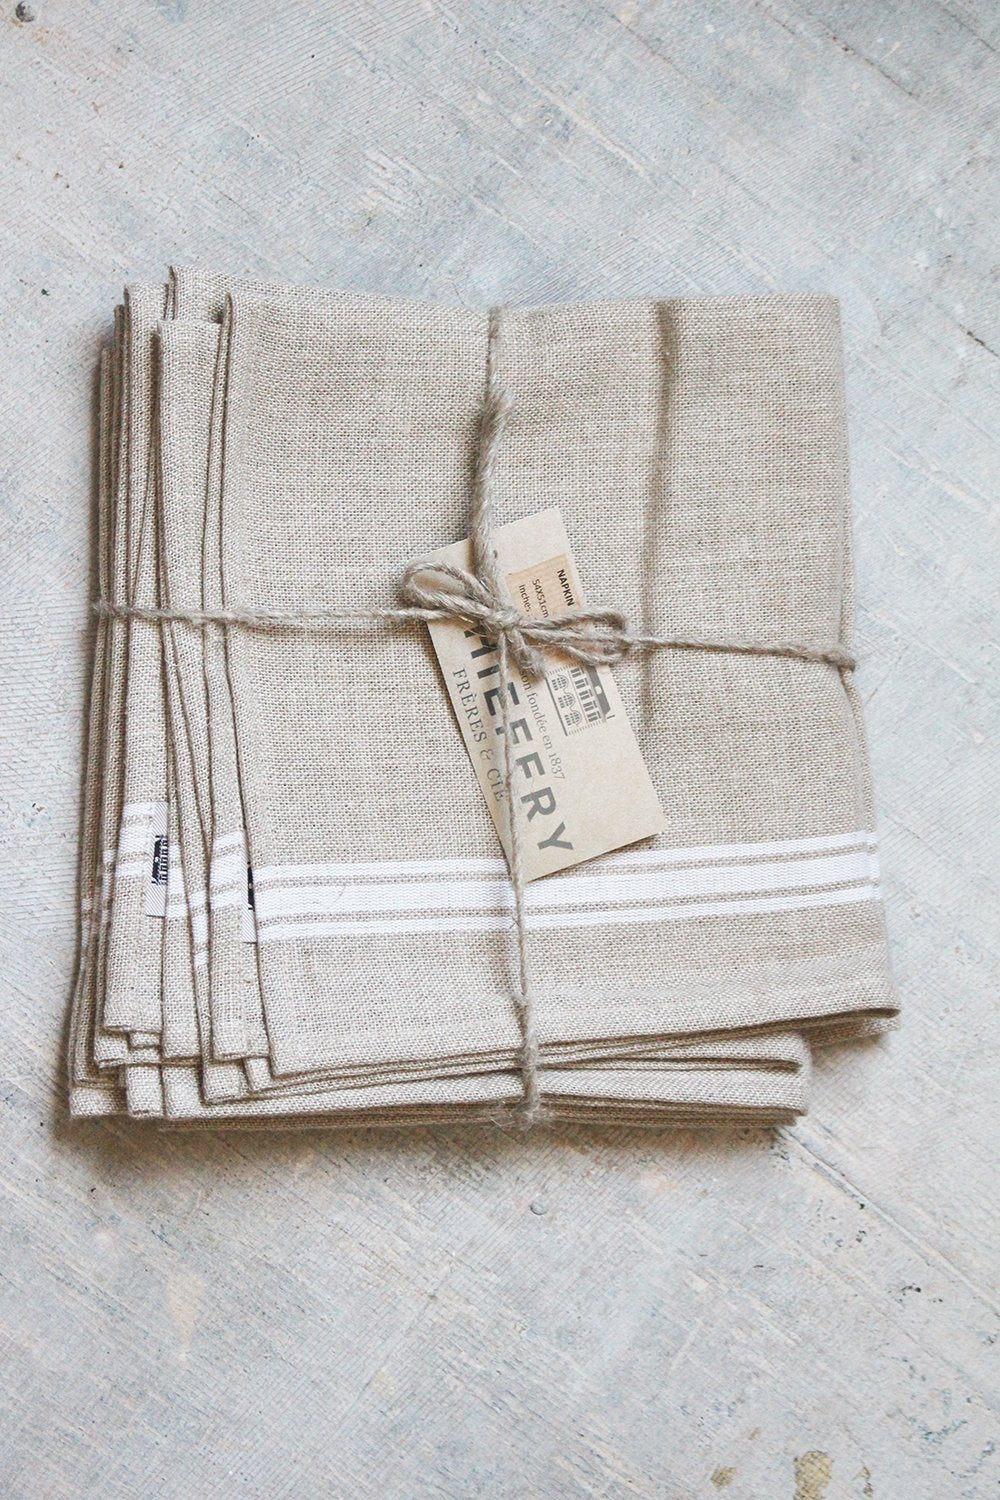 Thieffry White Monogramme Linen Dish Towel (28" x 20.5") - French Dry Goods